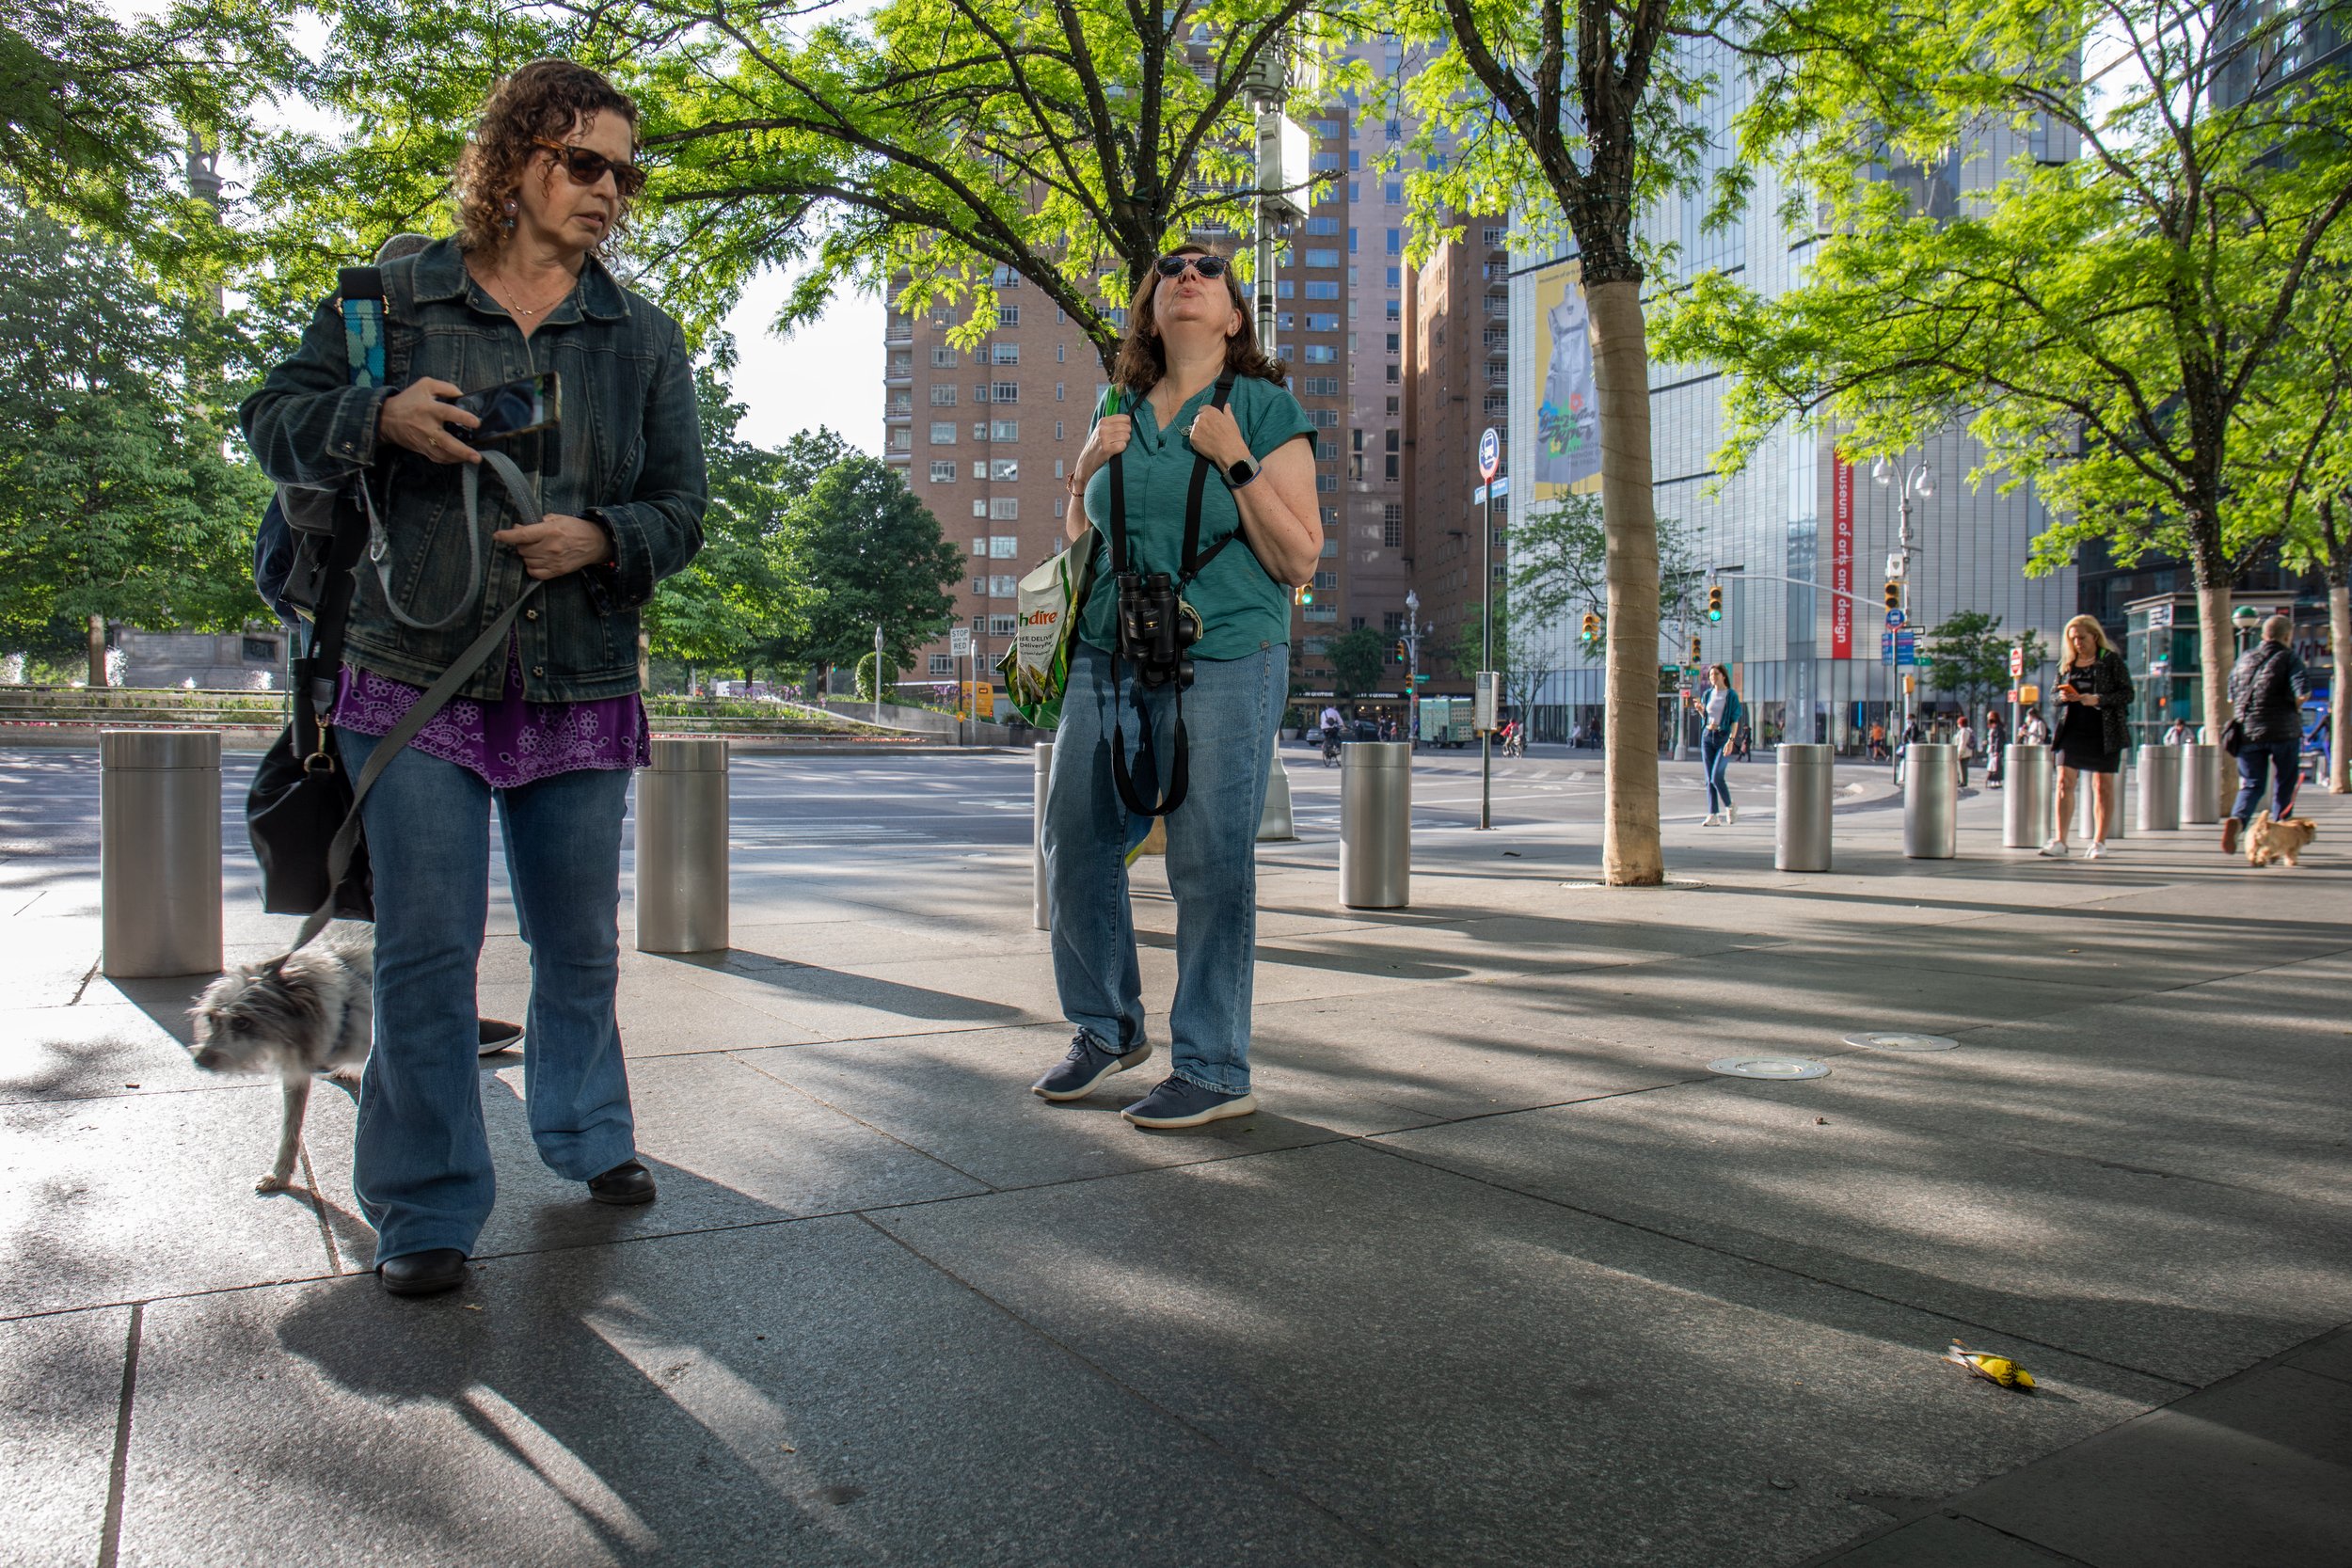  Collision monitors Alice Winkler, left, her dog Sawyer and Laura Lincks, volunteers with Project Safe Flight arrive at the Deutsche Bank Center building where they find a dead male Canadian Warbler. As route volunteers they report any deceased or in